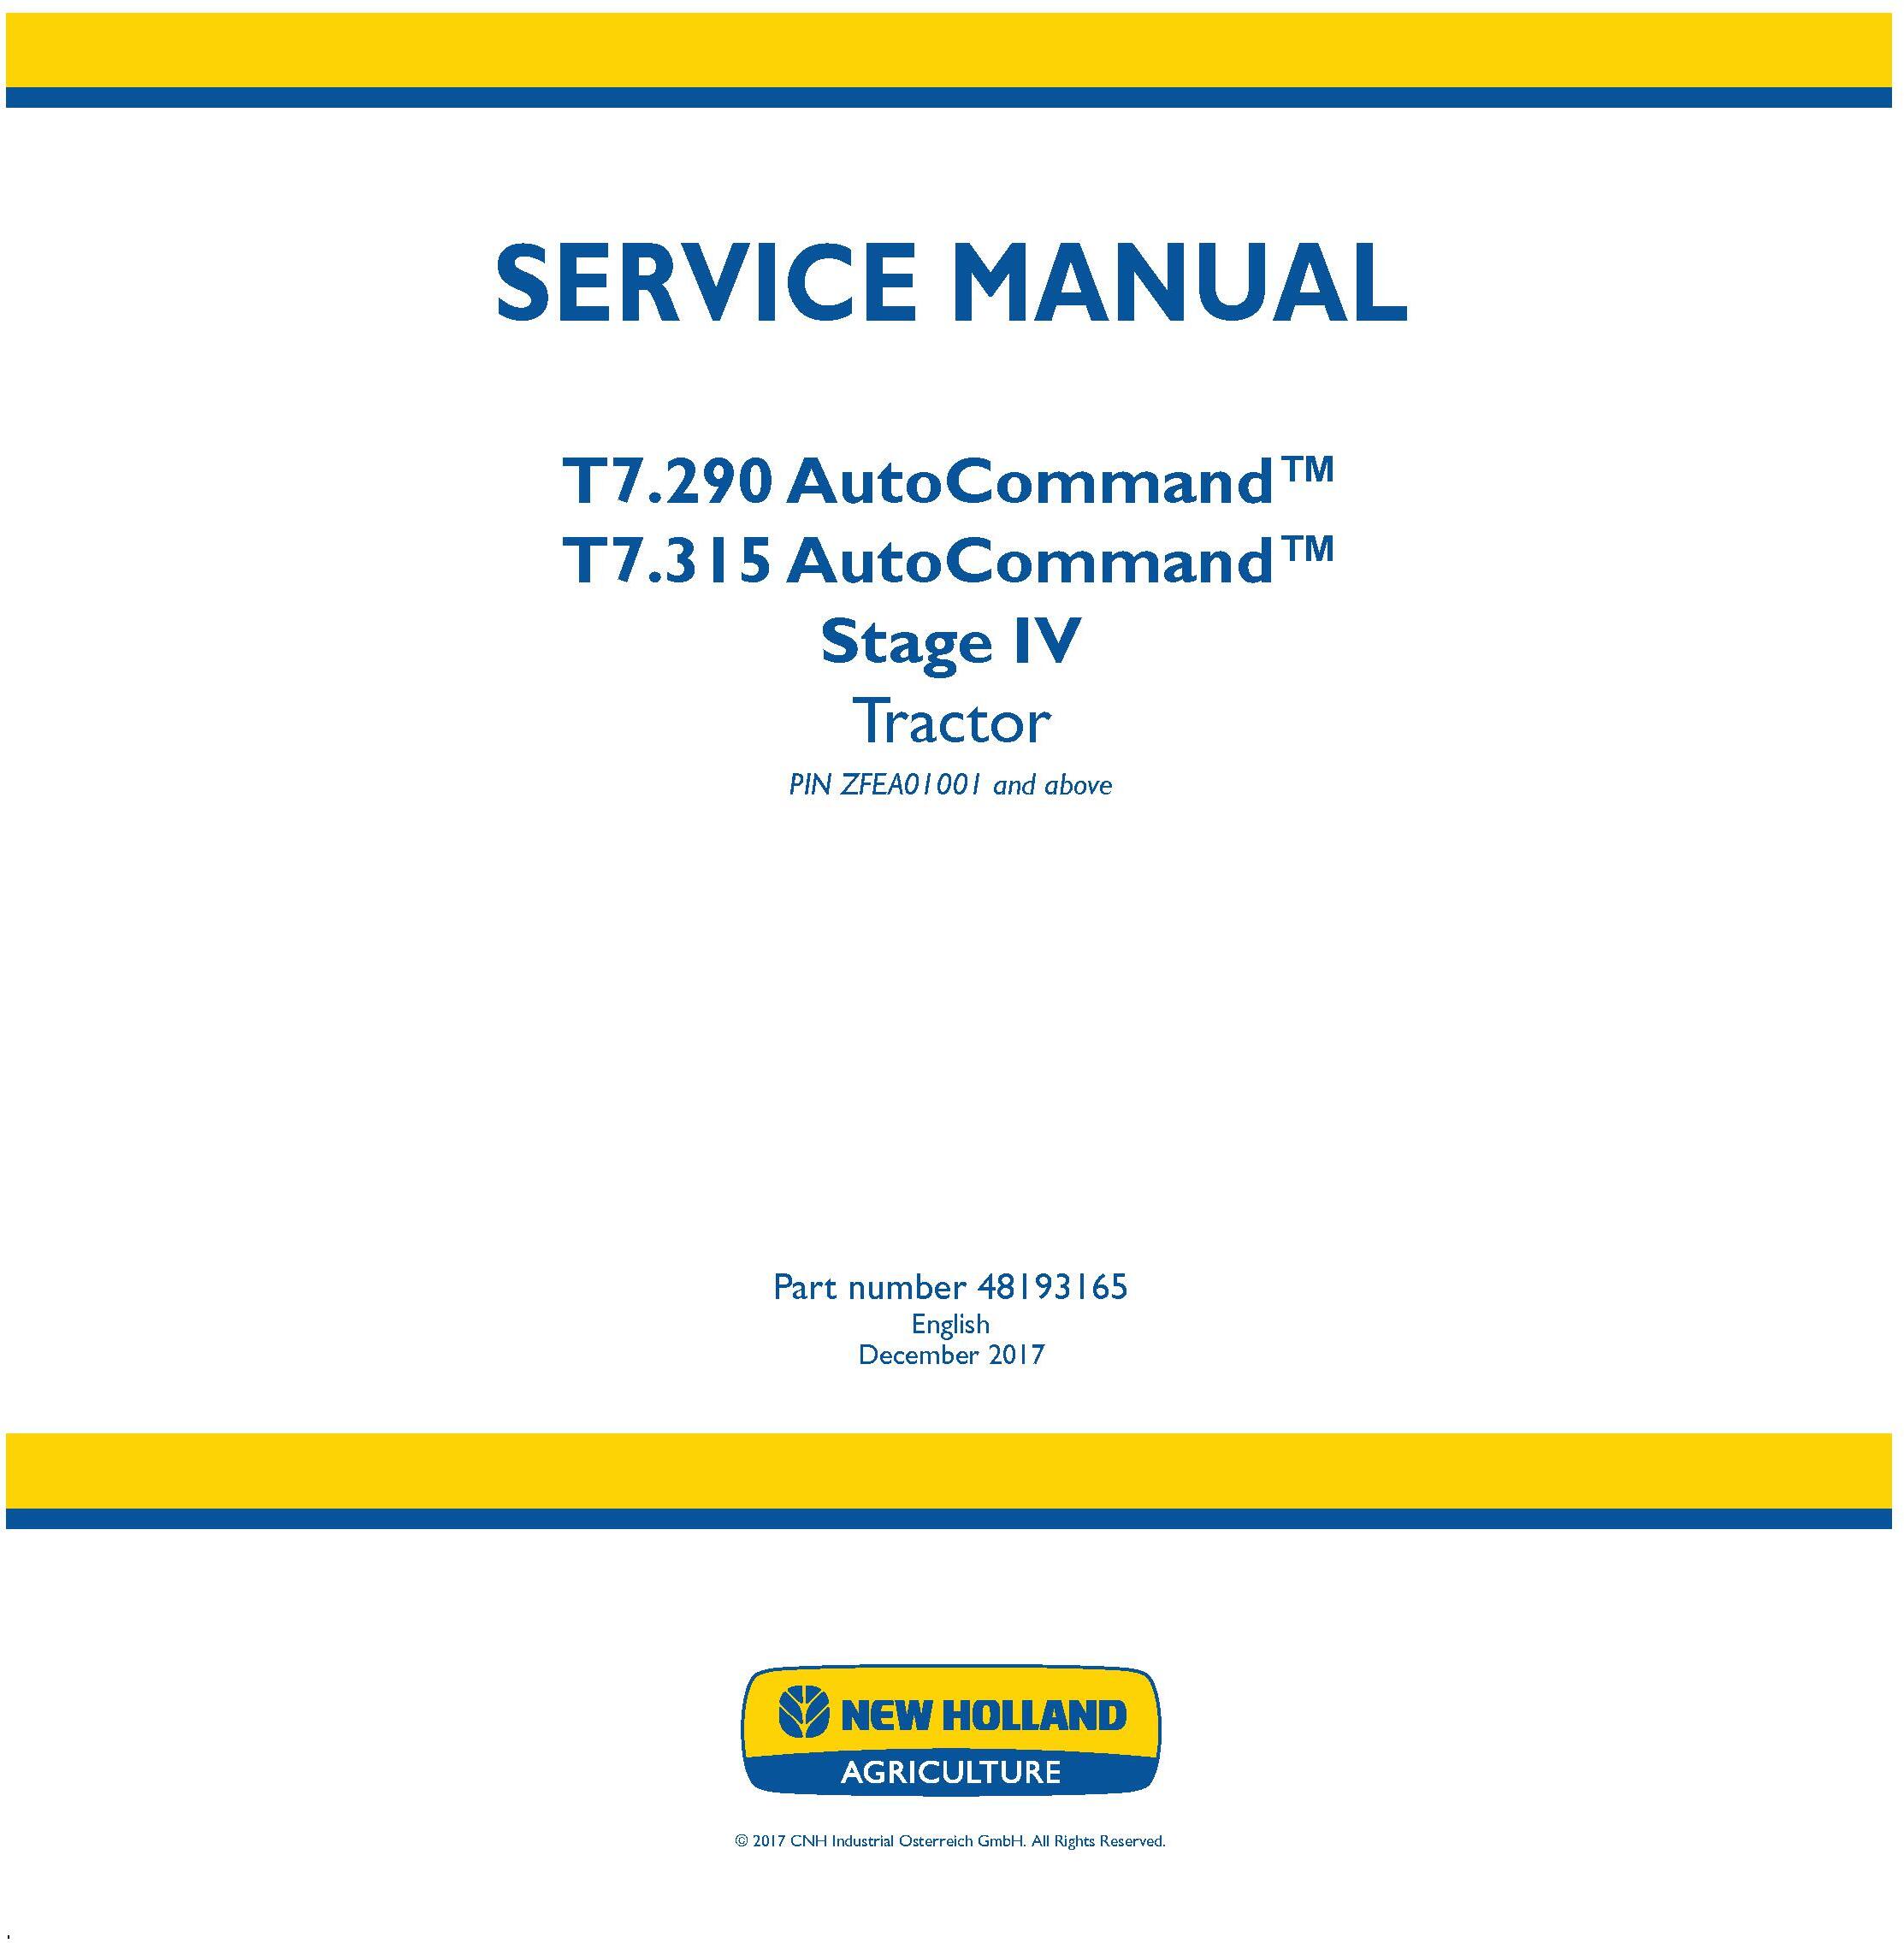 New Holland T7.290 AutoCommand, T7.315 AutoCommand Stage IV Tractor Service Manual (Europe) - 19502